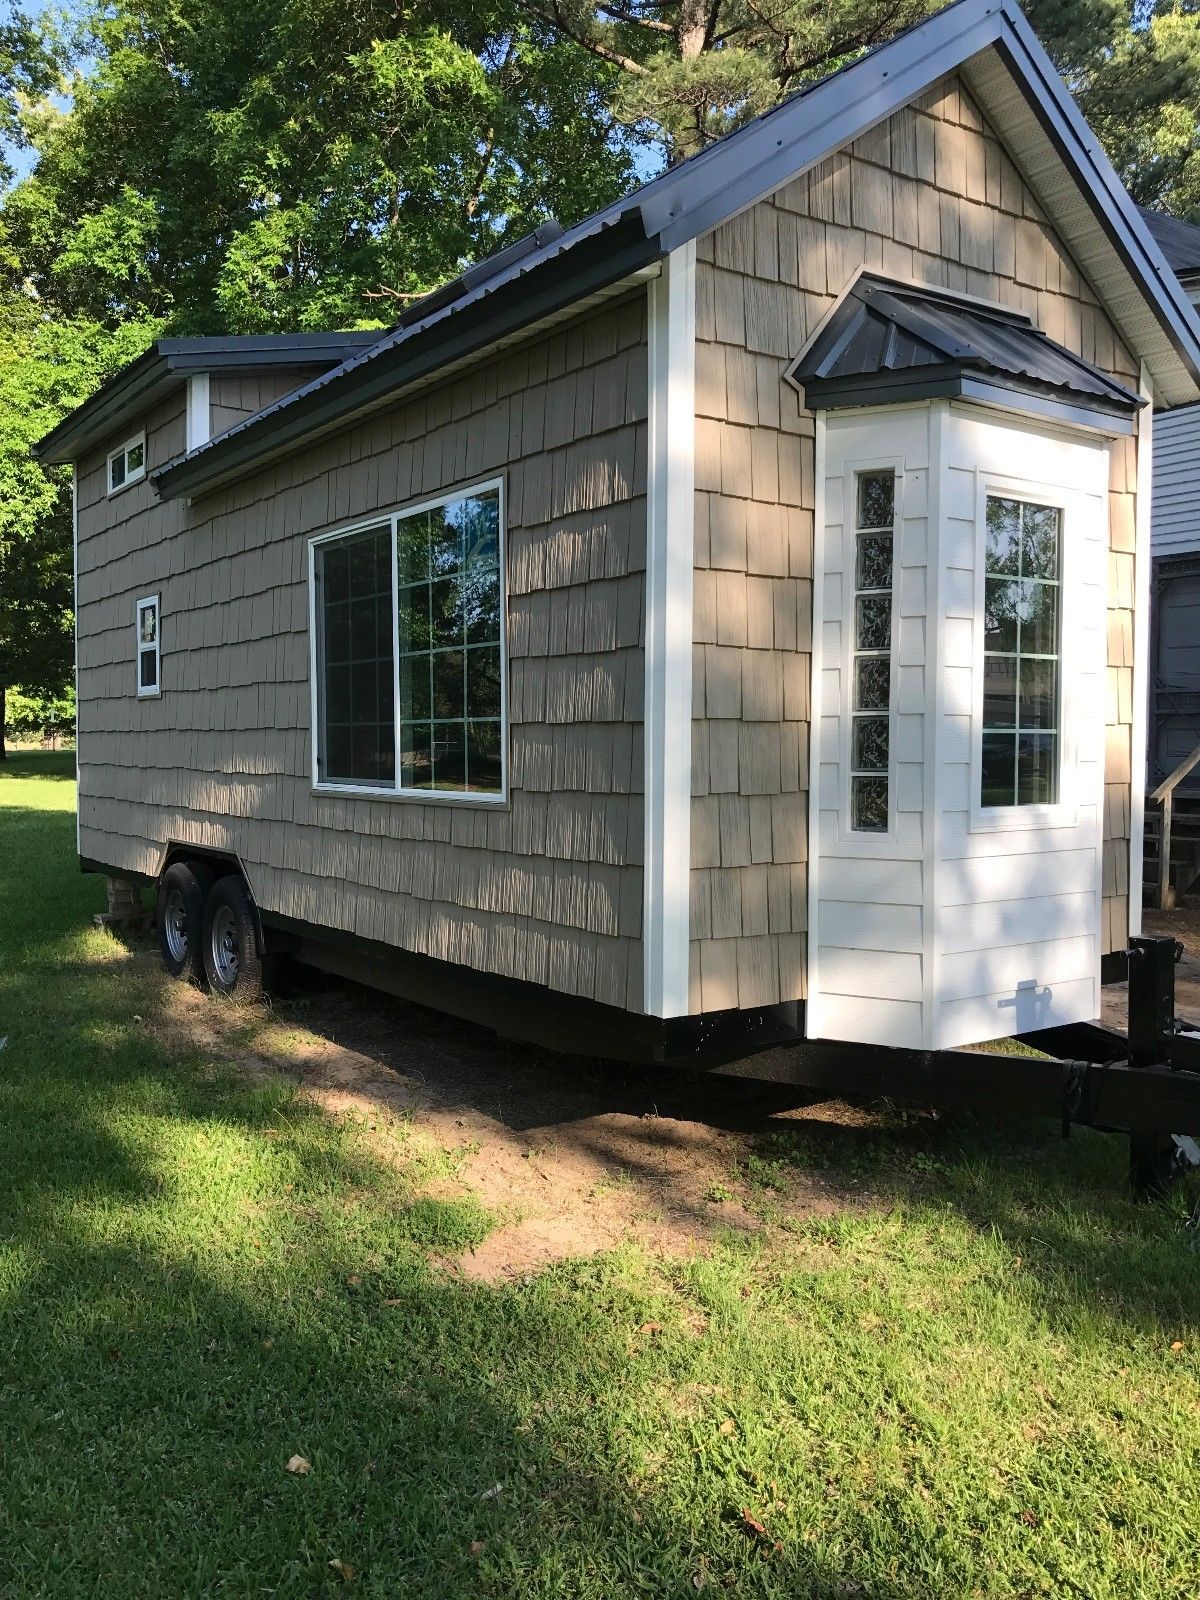 10 Tiny Houses On Wheels Portable Homes And Trailers